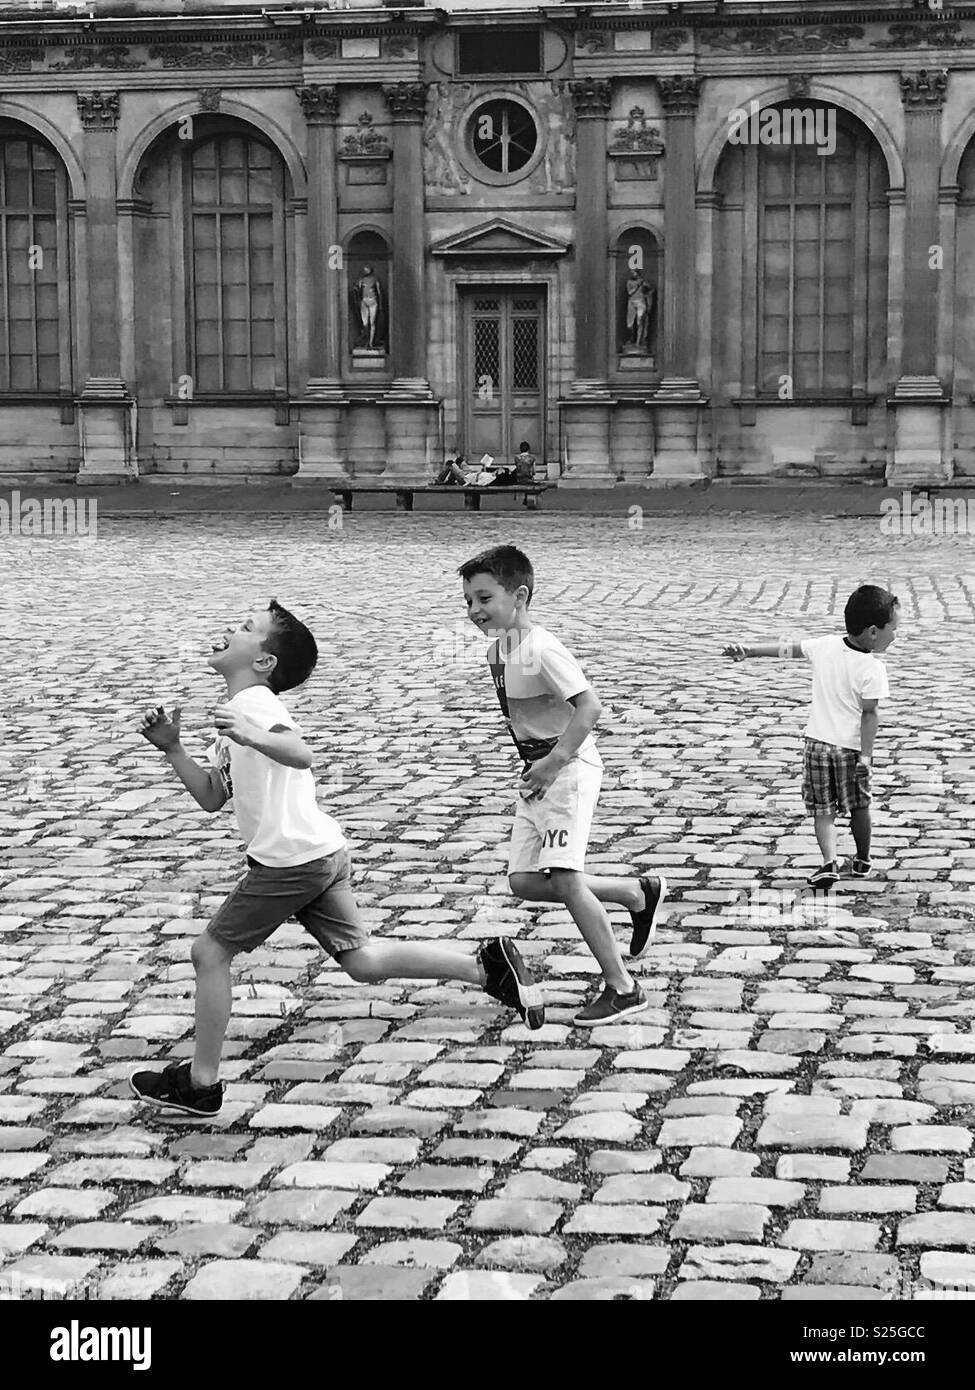 Tag your it. Kids playing tag at The louvre in Paris France. Stock Photo